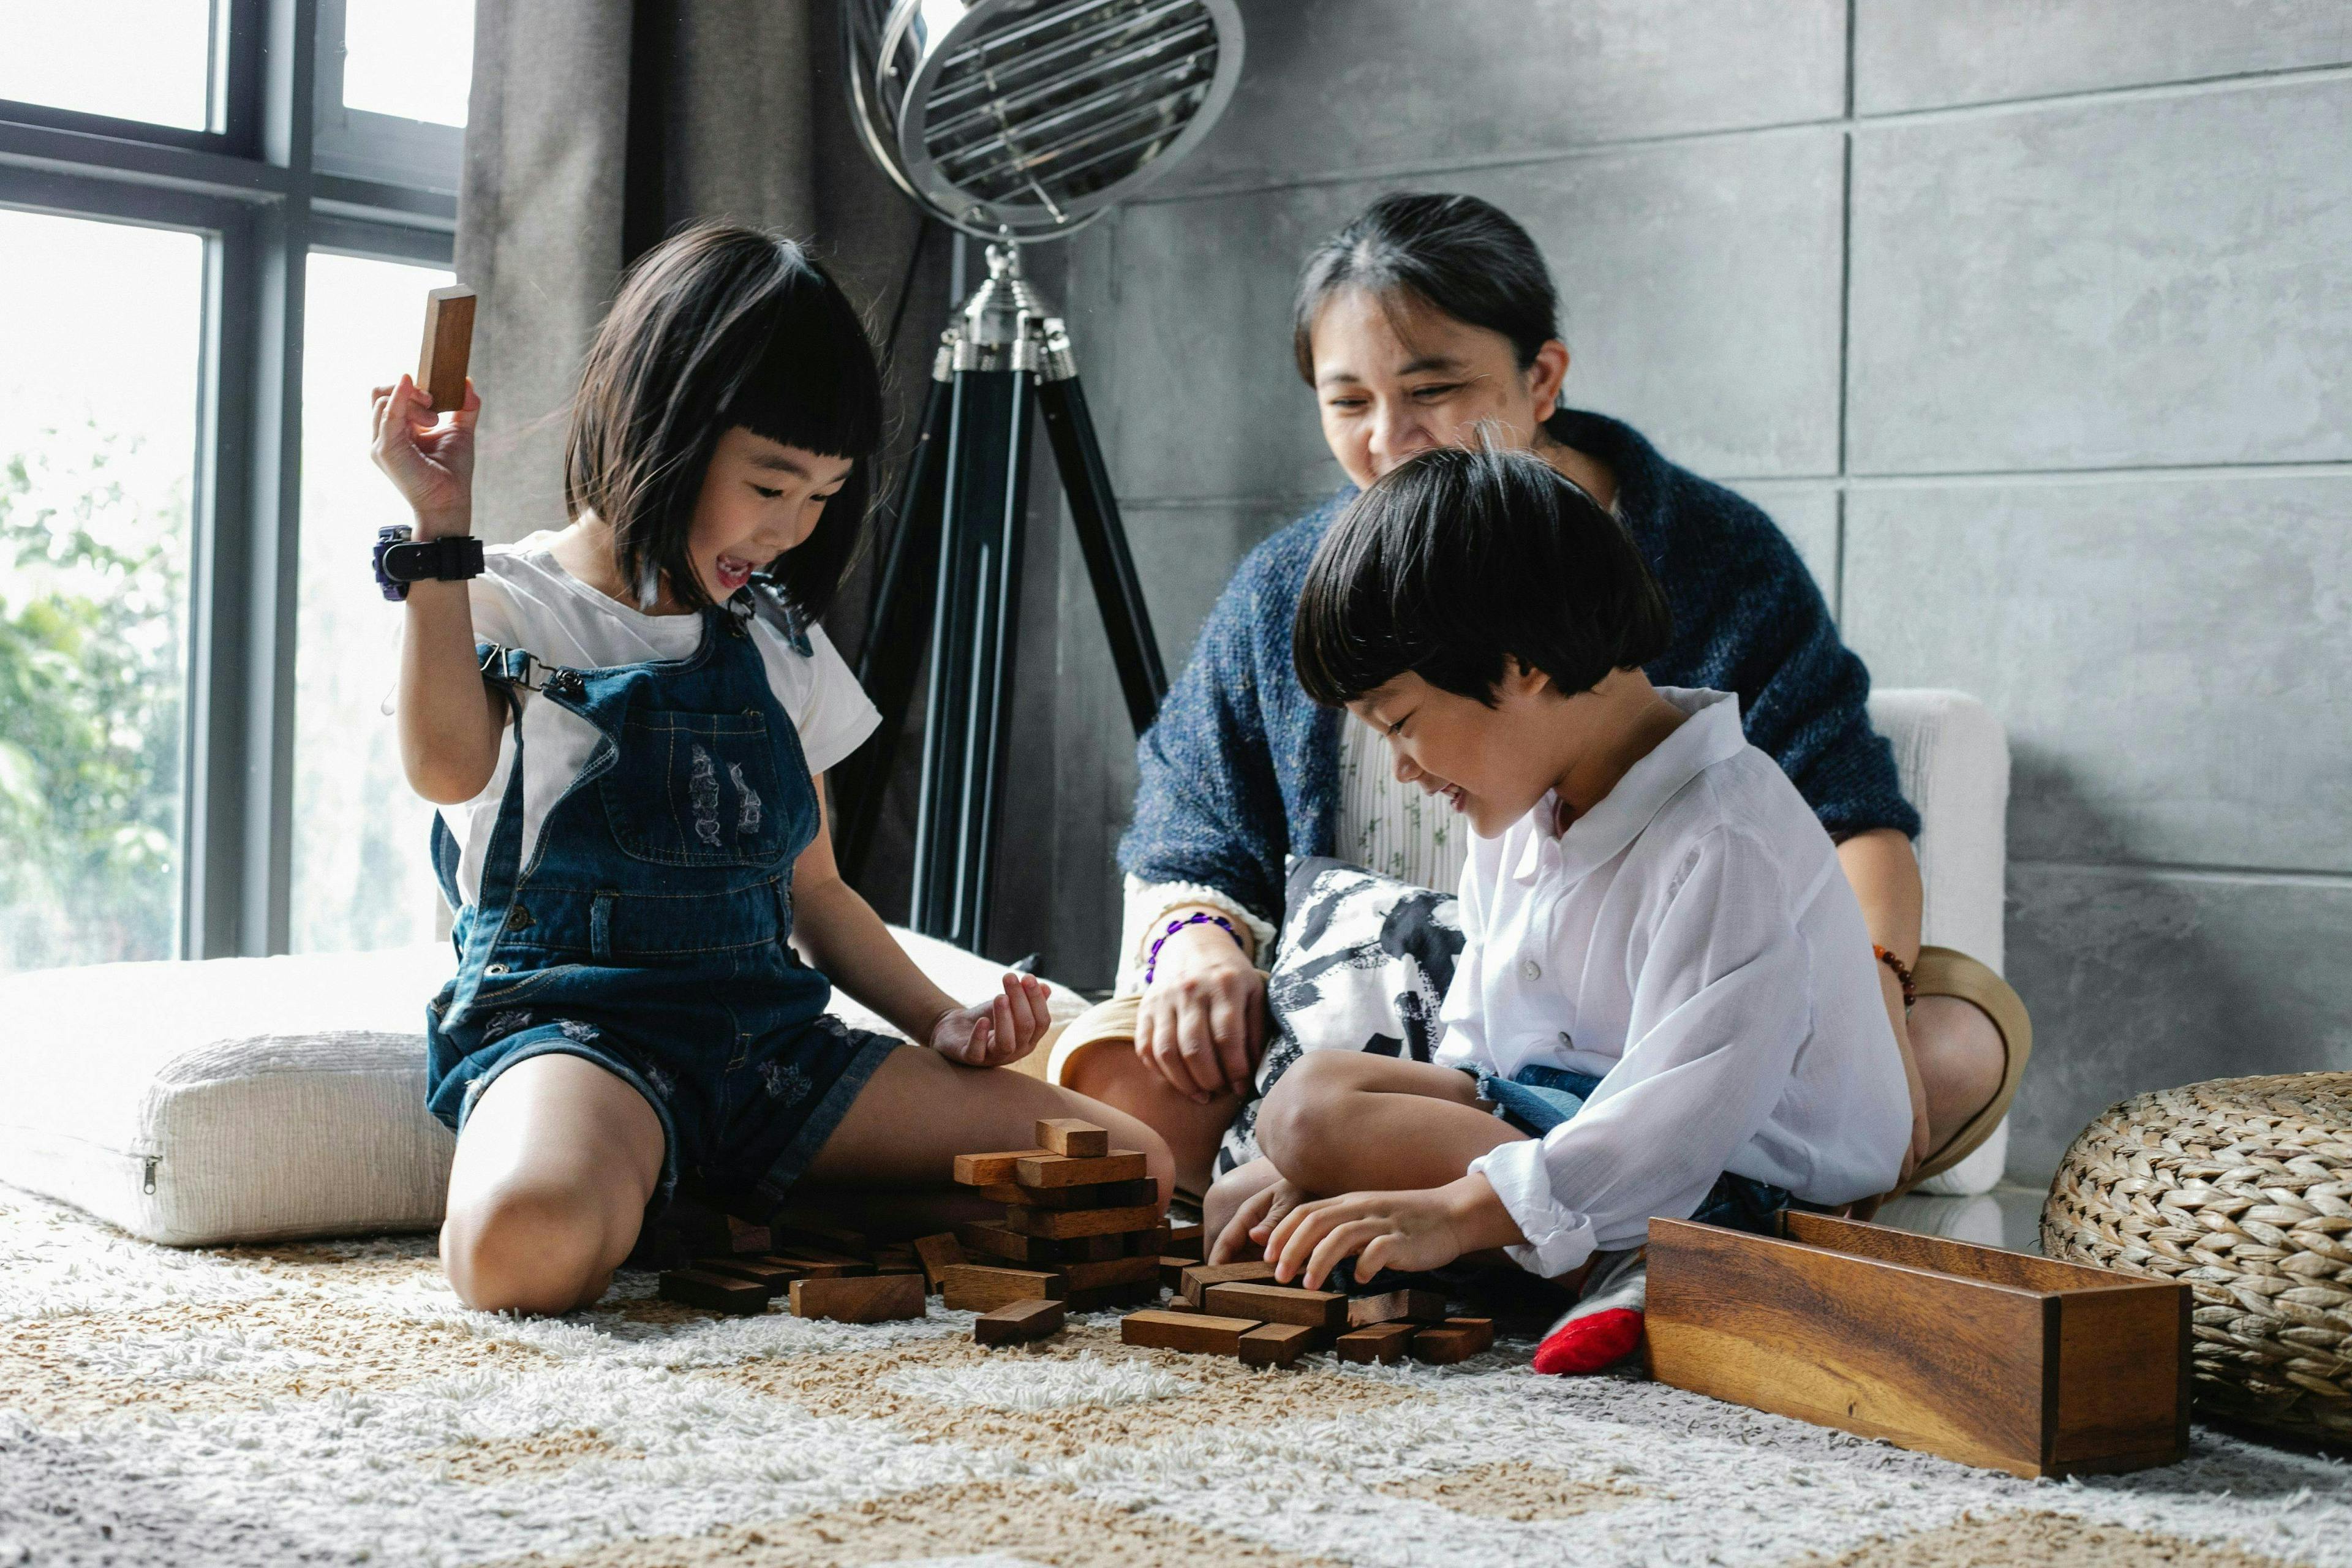 Two children are playing with wooden blocks while an adult woman observes and smiles; they are seated on the carpeted floor in a brightly lit, modern living room.